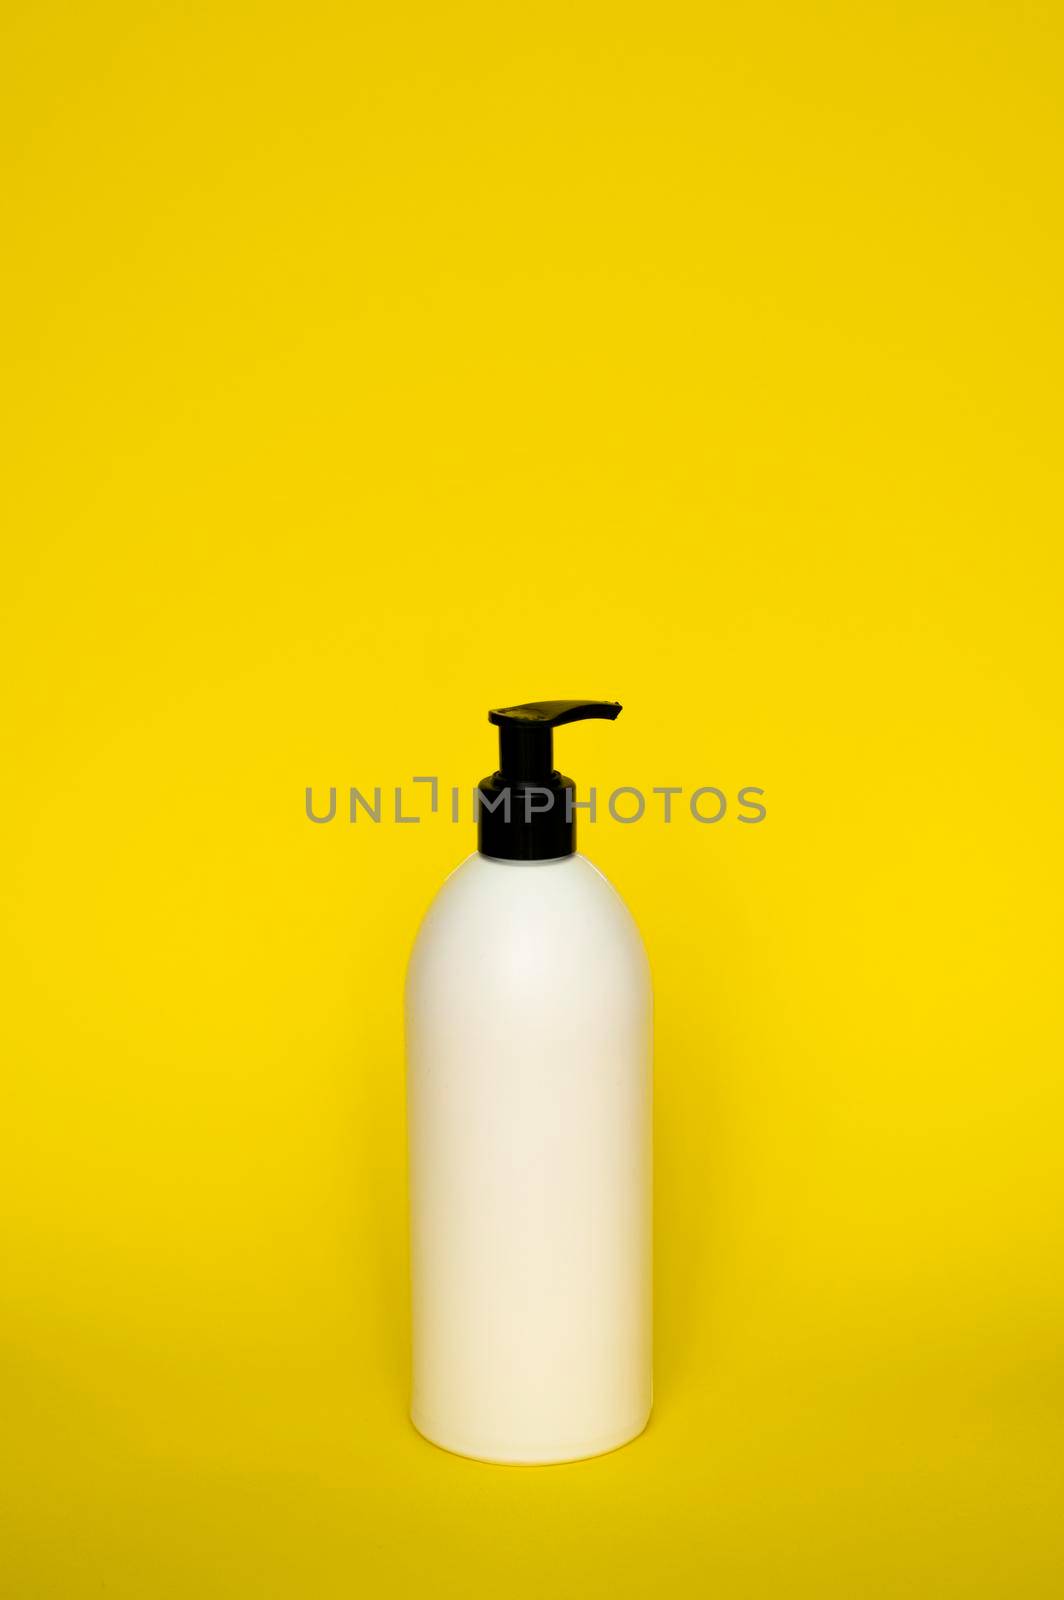 White cosmetic plastic bottle with black pump dispenser on yellow background. Liquid container for gel, lotion, cream, shampoo, bath foam